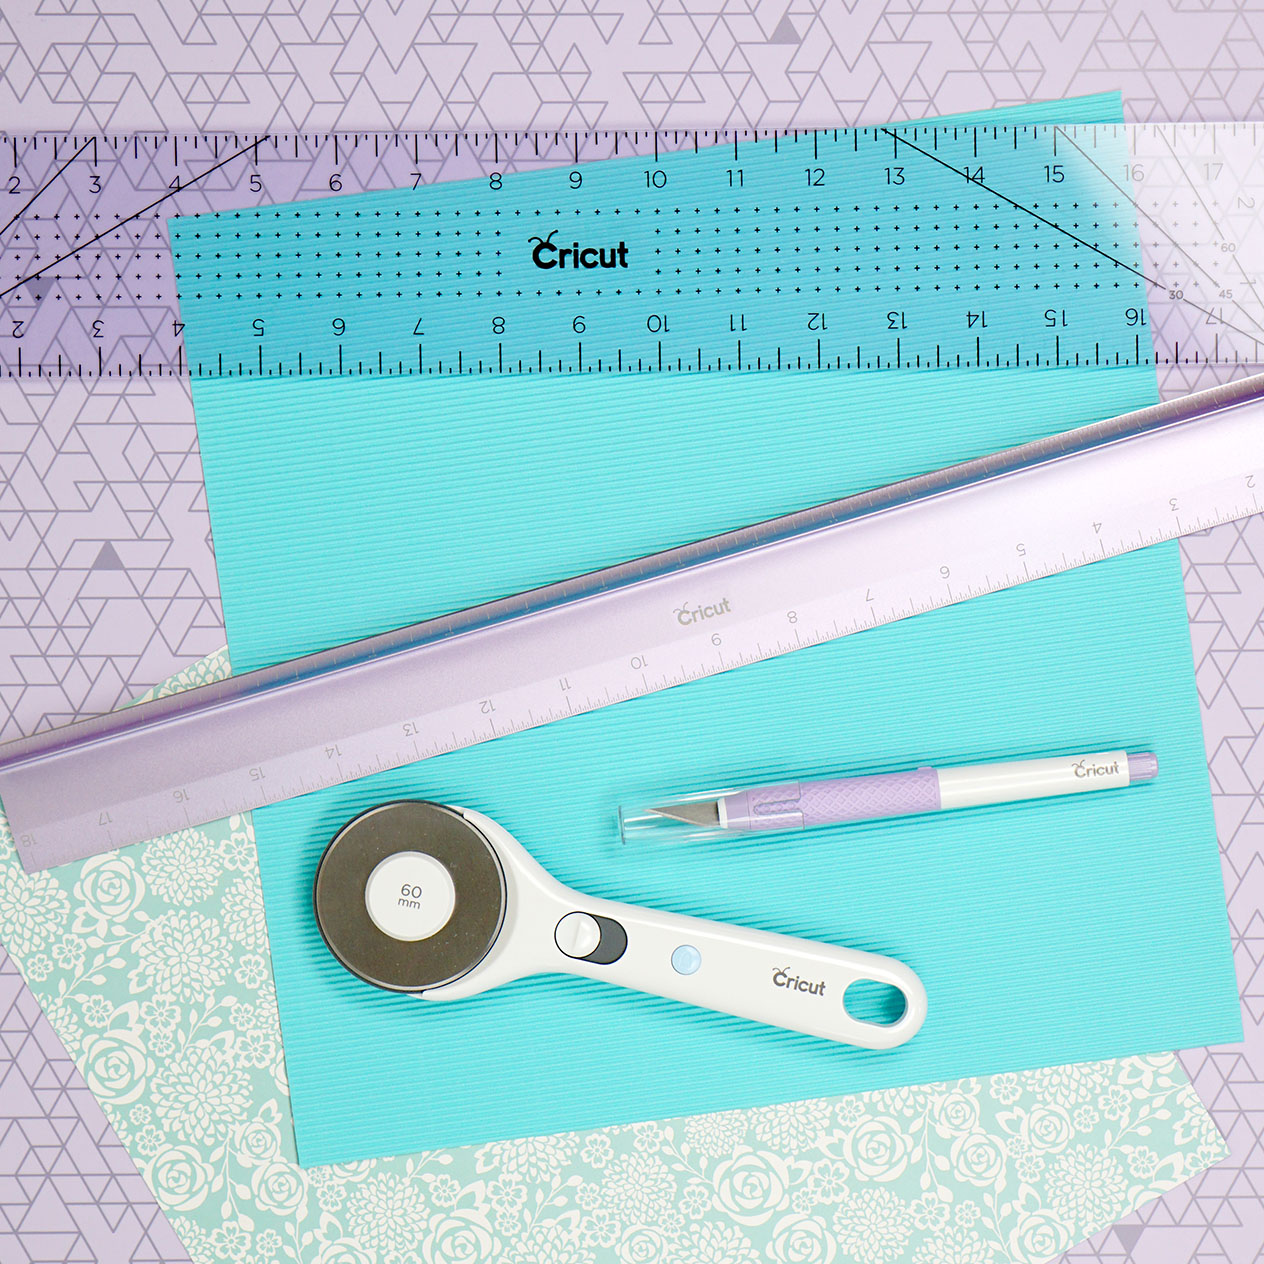 10 Cutting Tools for Crafters